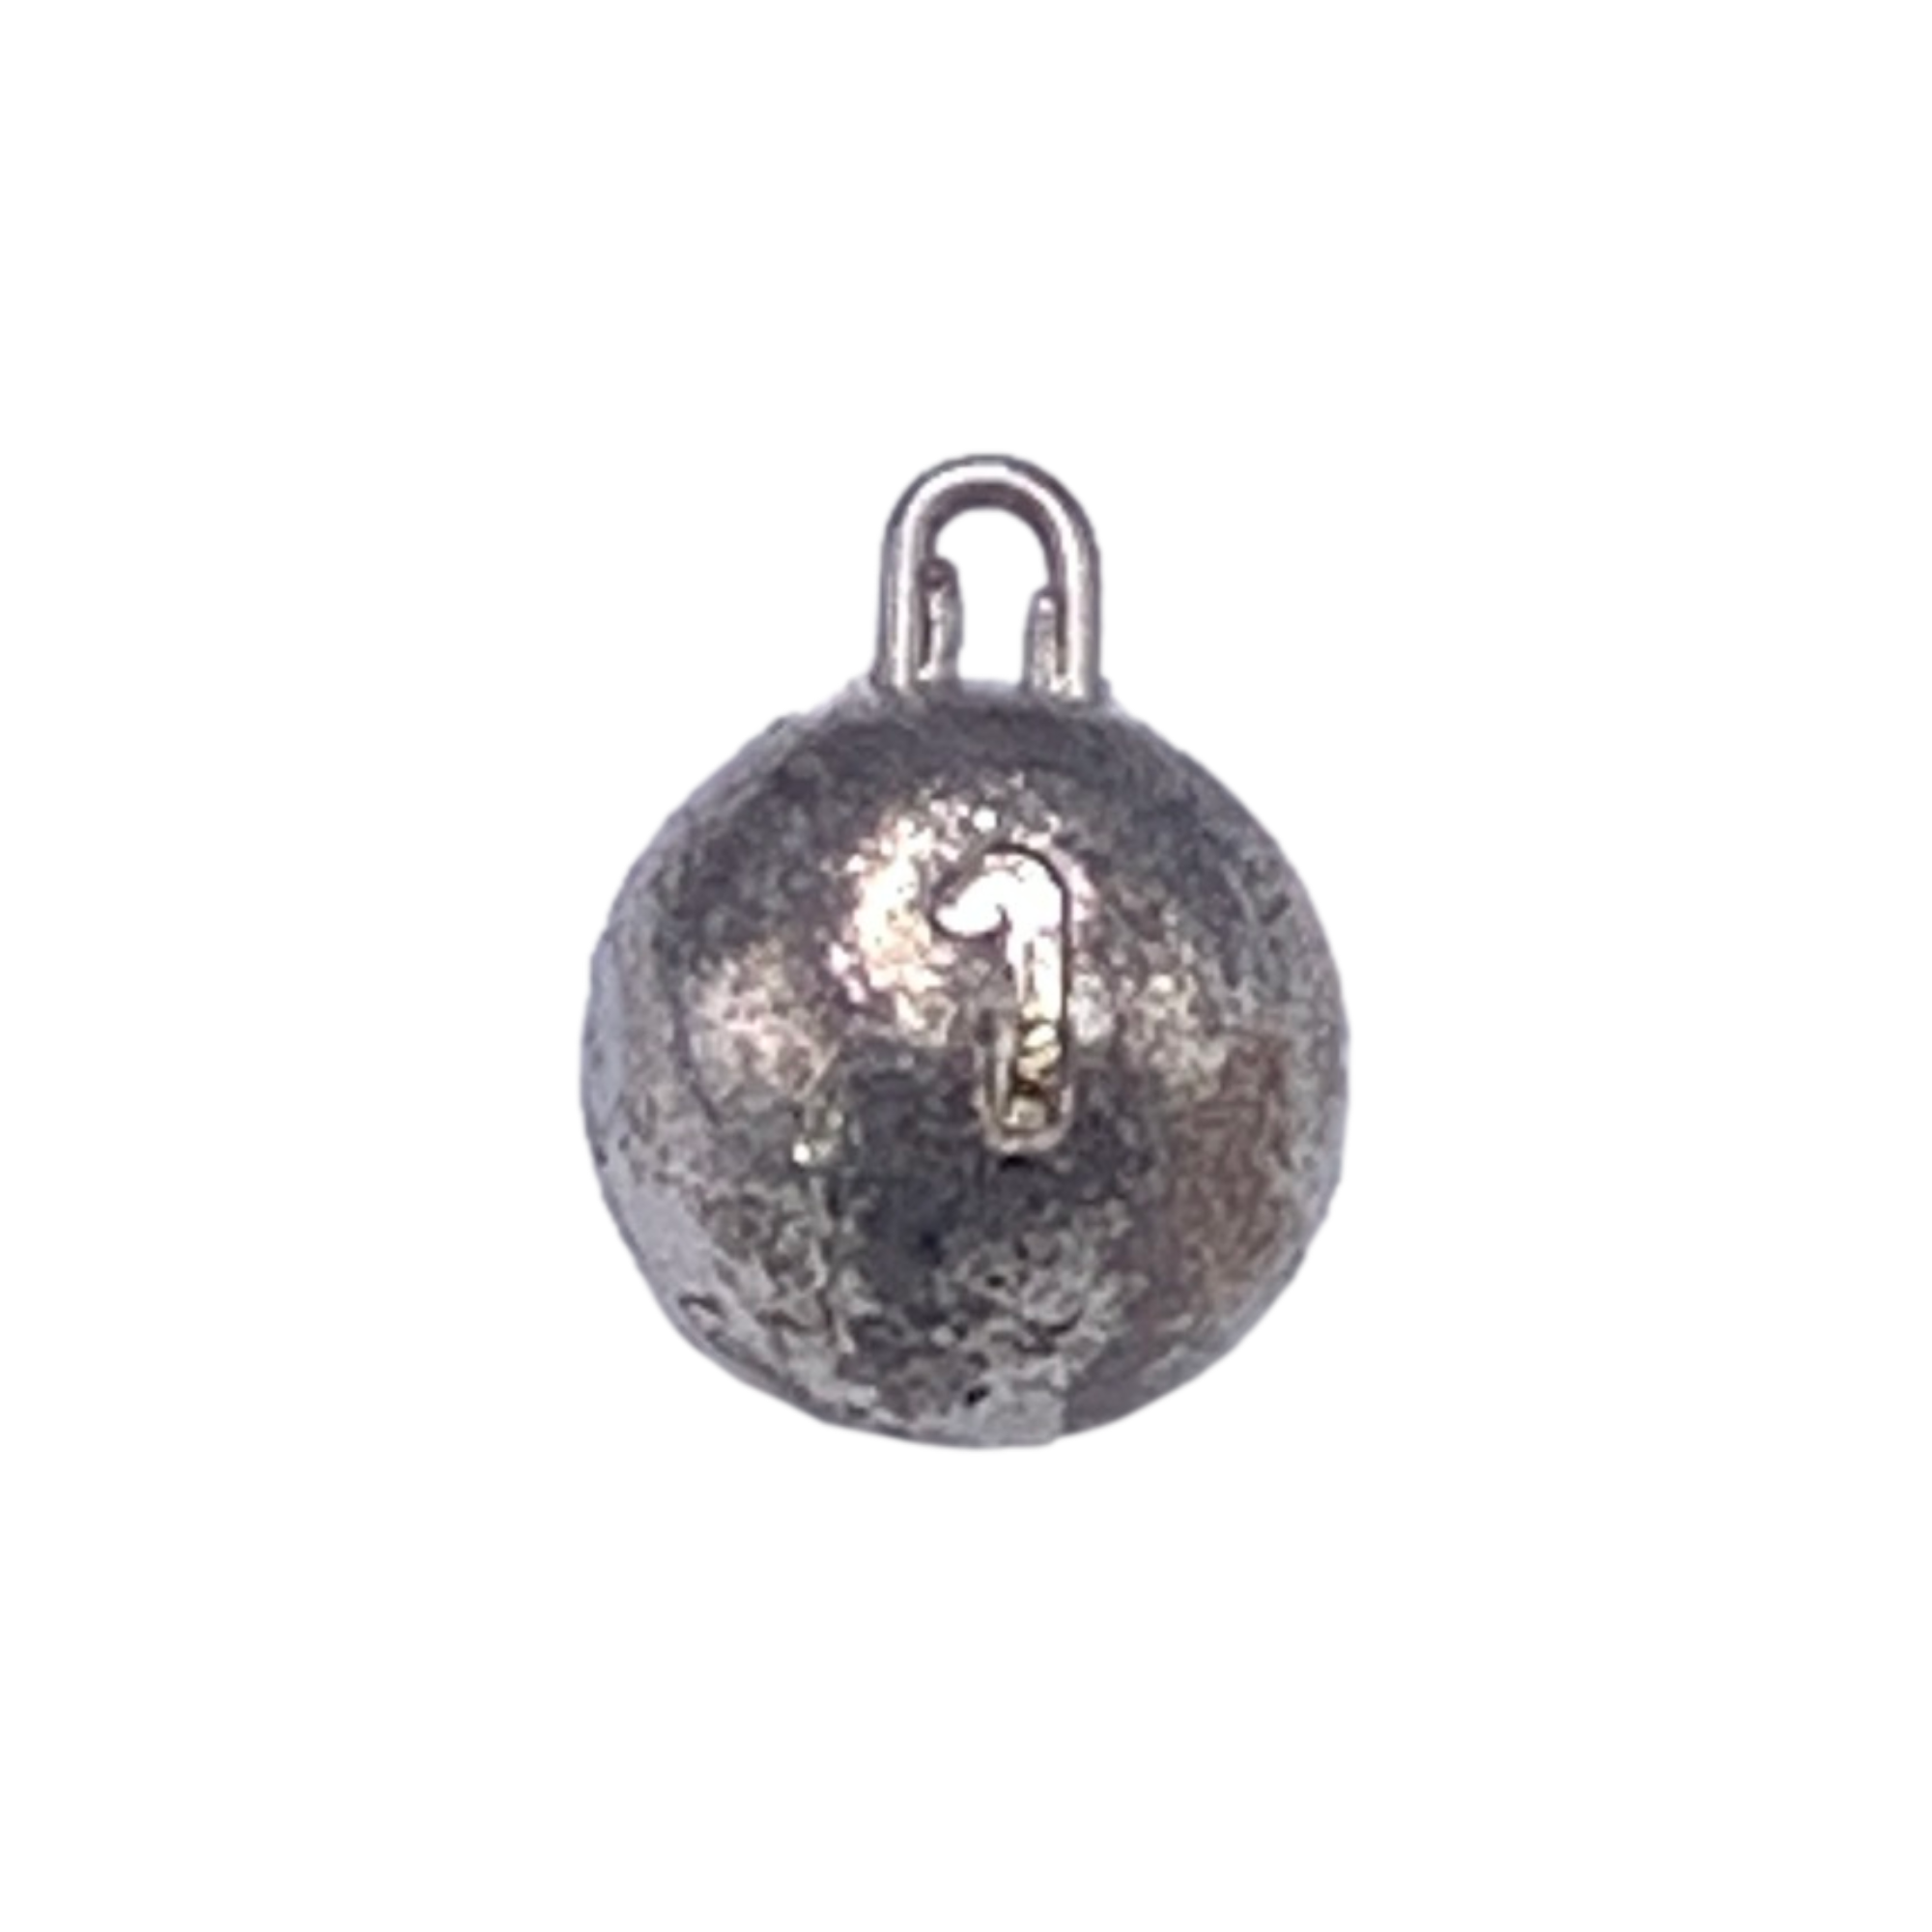 5oz Cannon Ball Sea Fishing Weights Pack Of 5 